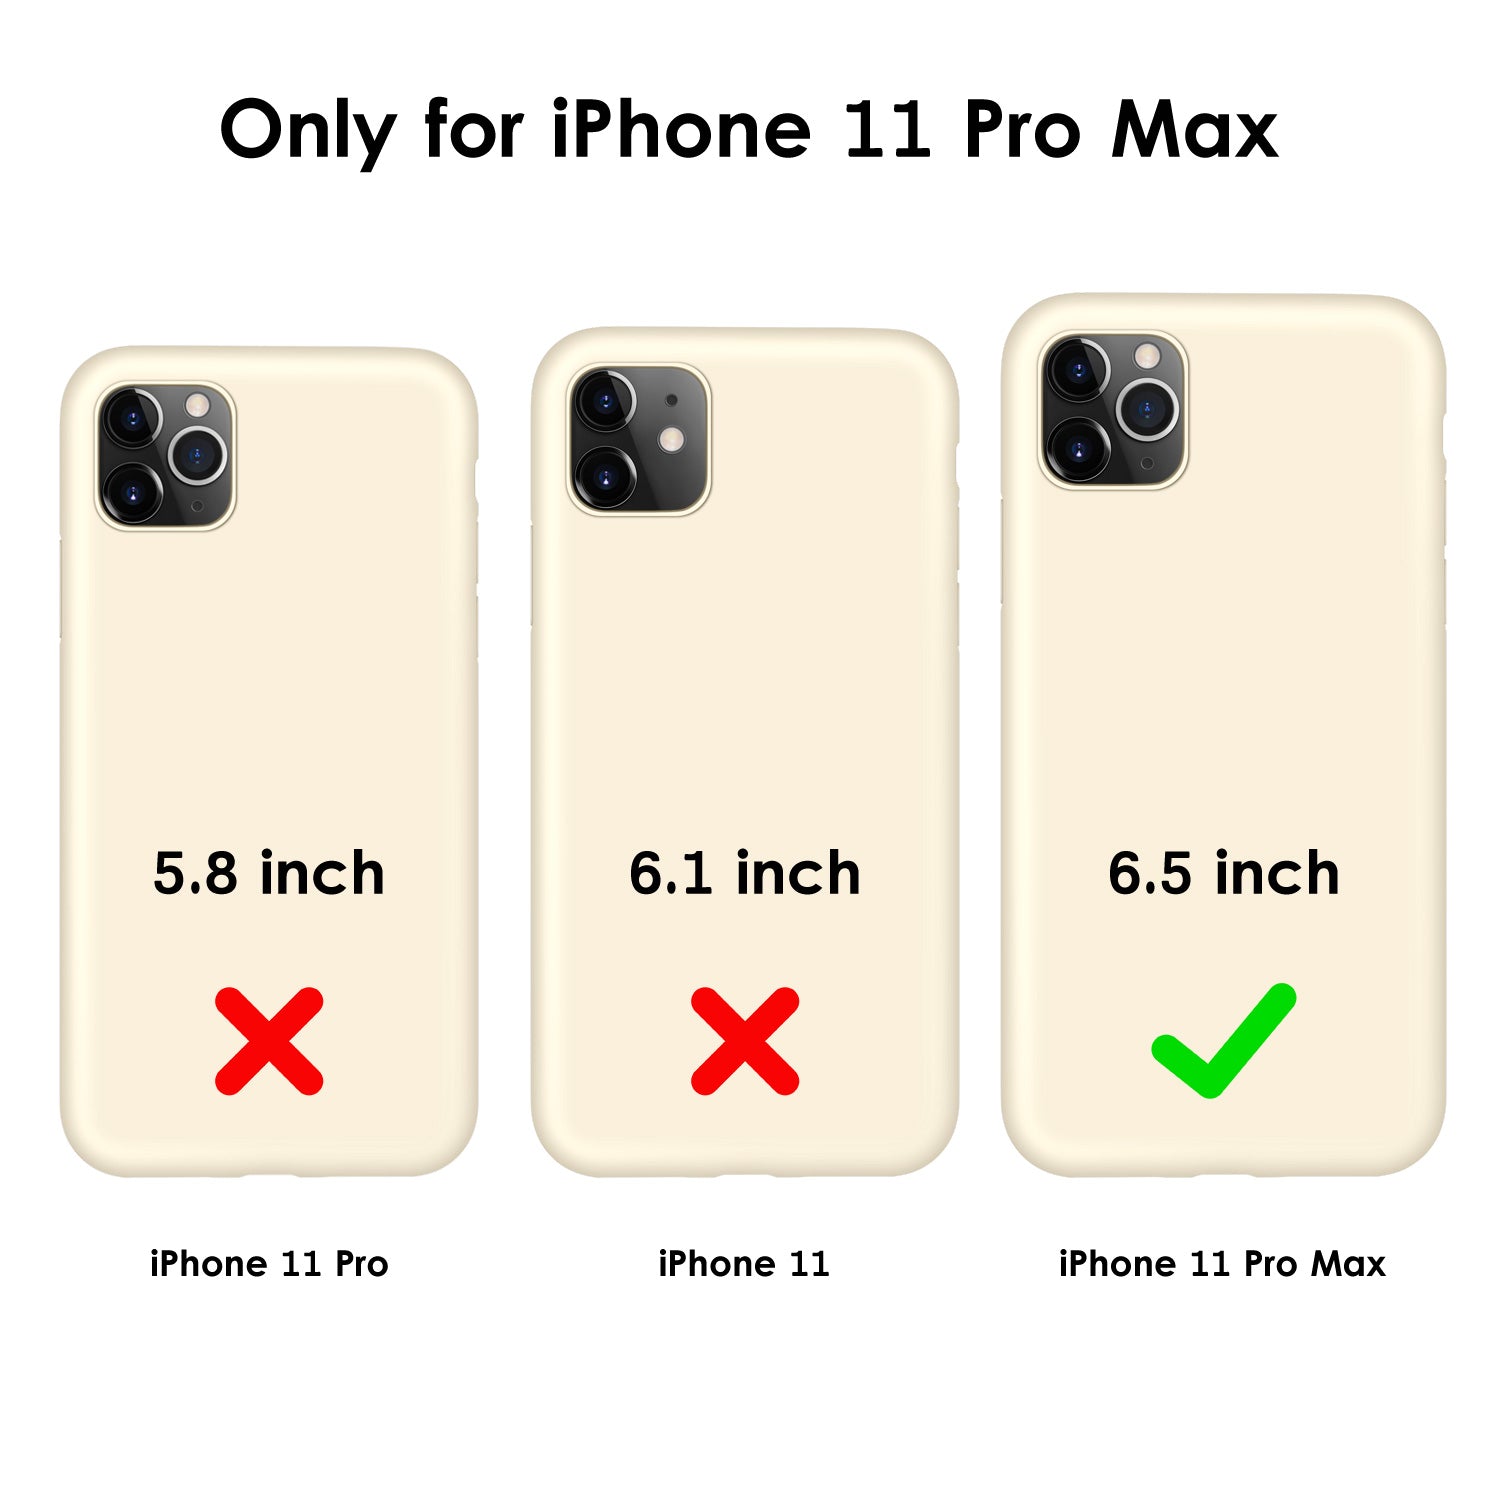 DTTO Compatible with iPhone 11 Pro Max Case, [Romance Series] Silicone Cover [Enhanced Camera and Screen Protection] with Honeycomb Grid Cushion for iPhone 11 Pro Max 2019 6.5", Mint Green